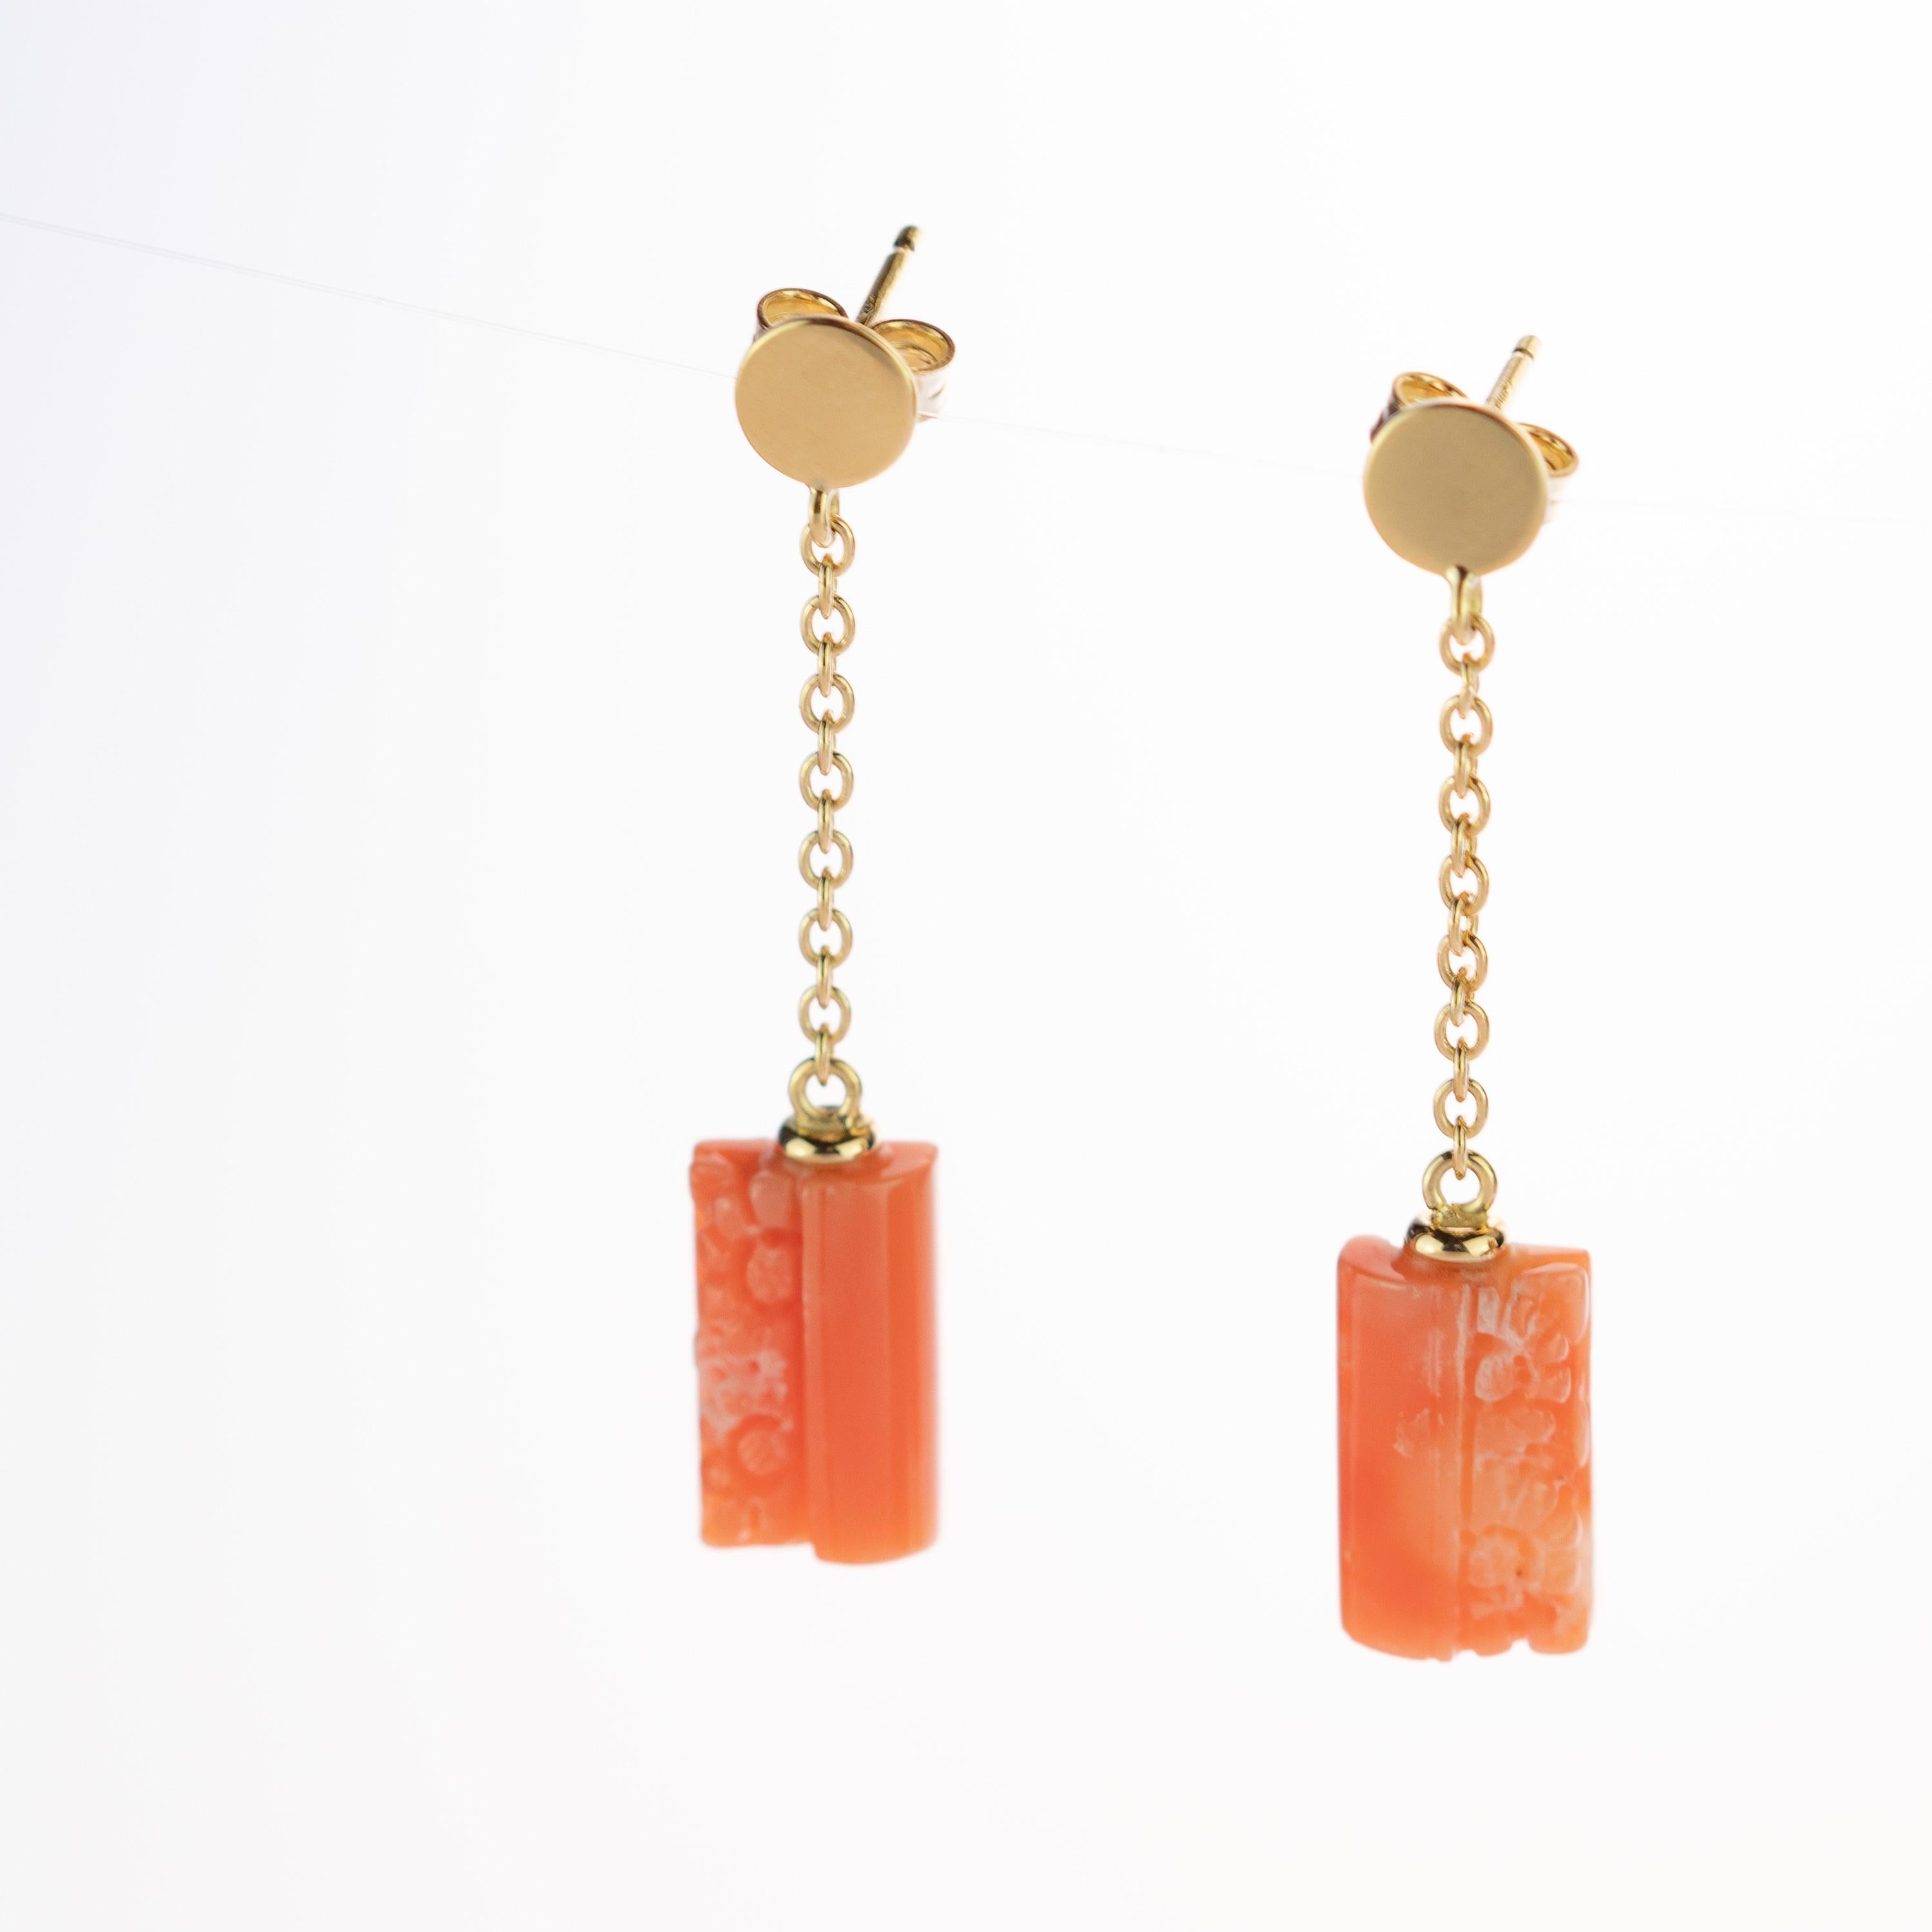 One of a kind rectangular and cylindrical mediterranean natural coral earrings. A delicate gold circle piece with two delicate 18 karat yellow gold chains ending in marvellous carved coral piece. Evoking all the italian tradition resulting in a